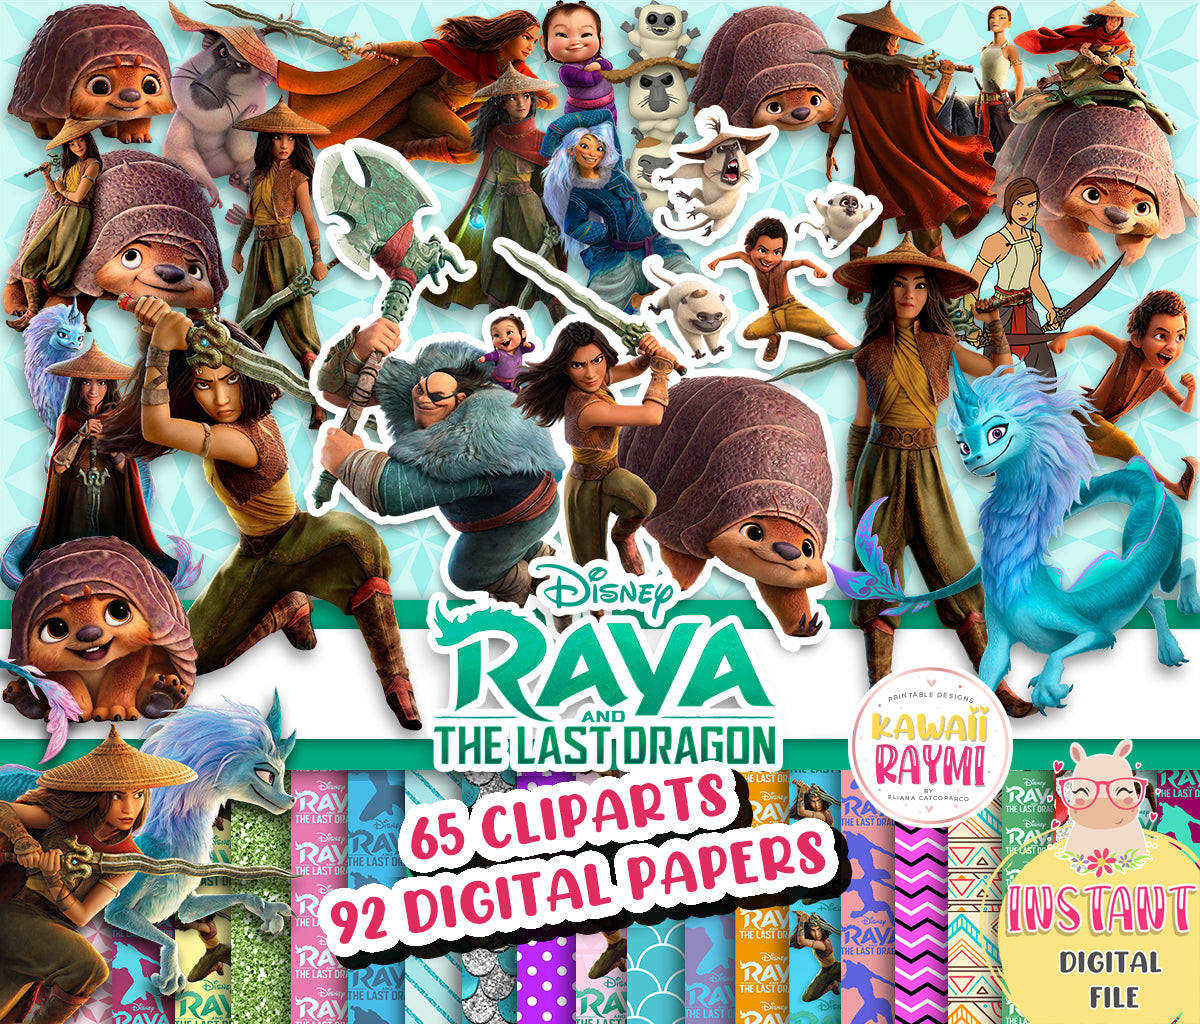 Raya and the last dragon CLIPARTS-DIGITAL PAPERS.INSTANT DOWNLOAD